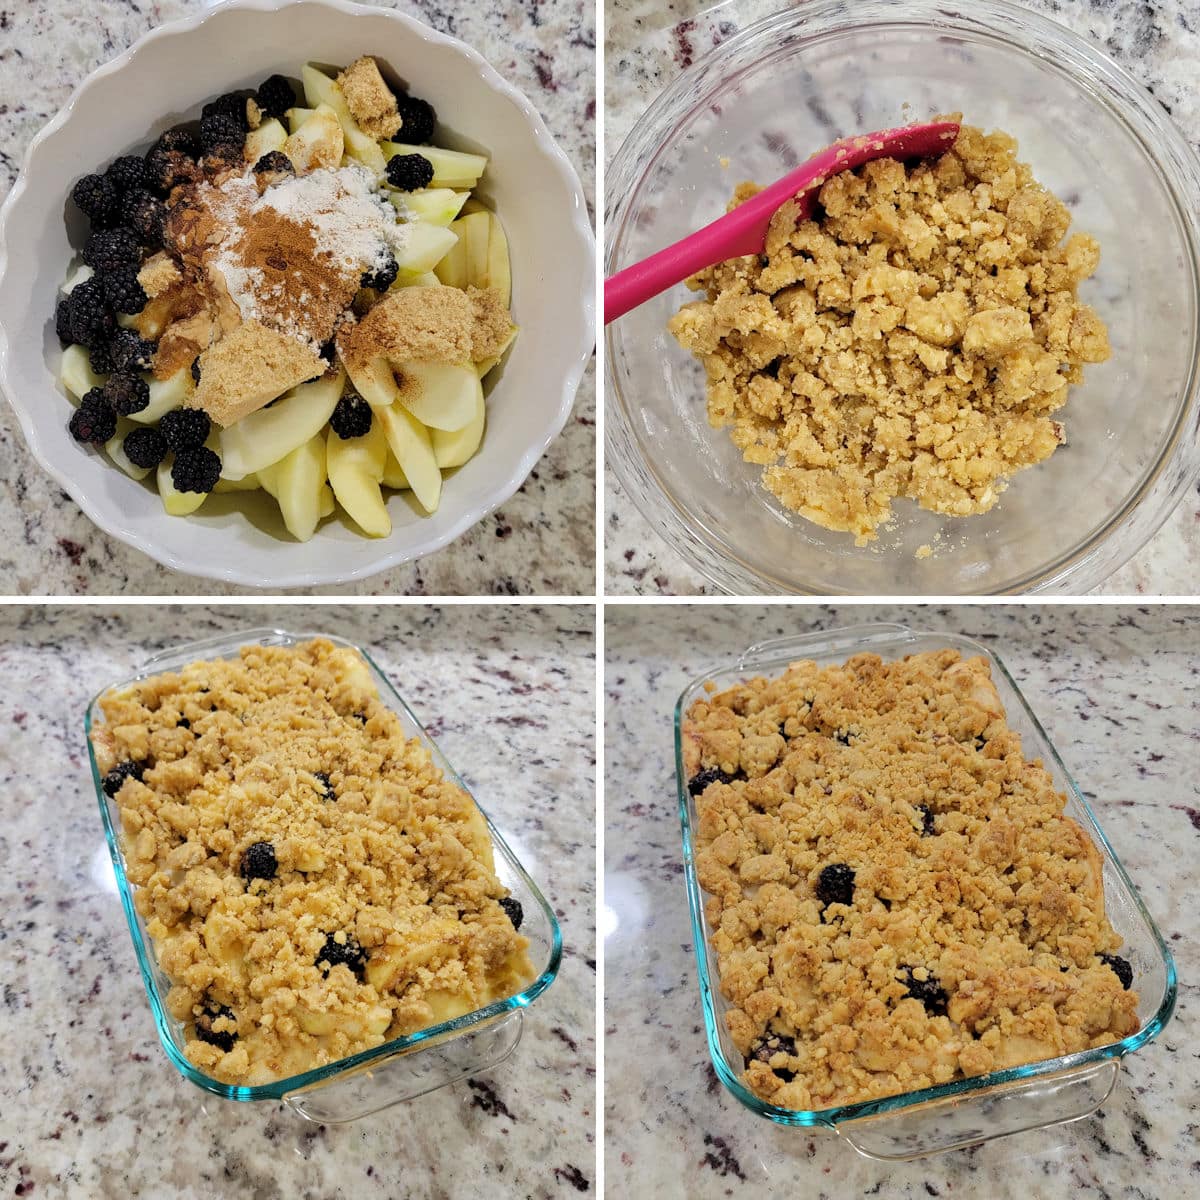 Making apple blackberry crumble in a glass casserole dish.